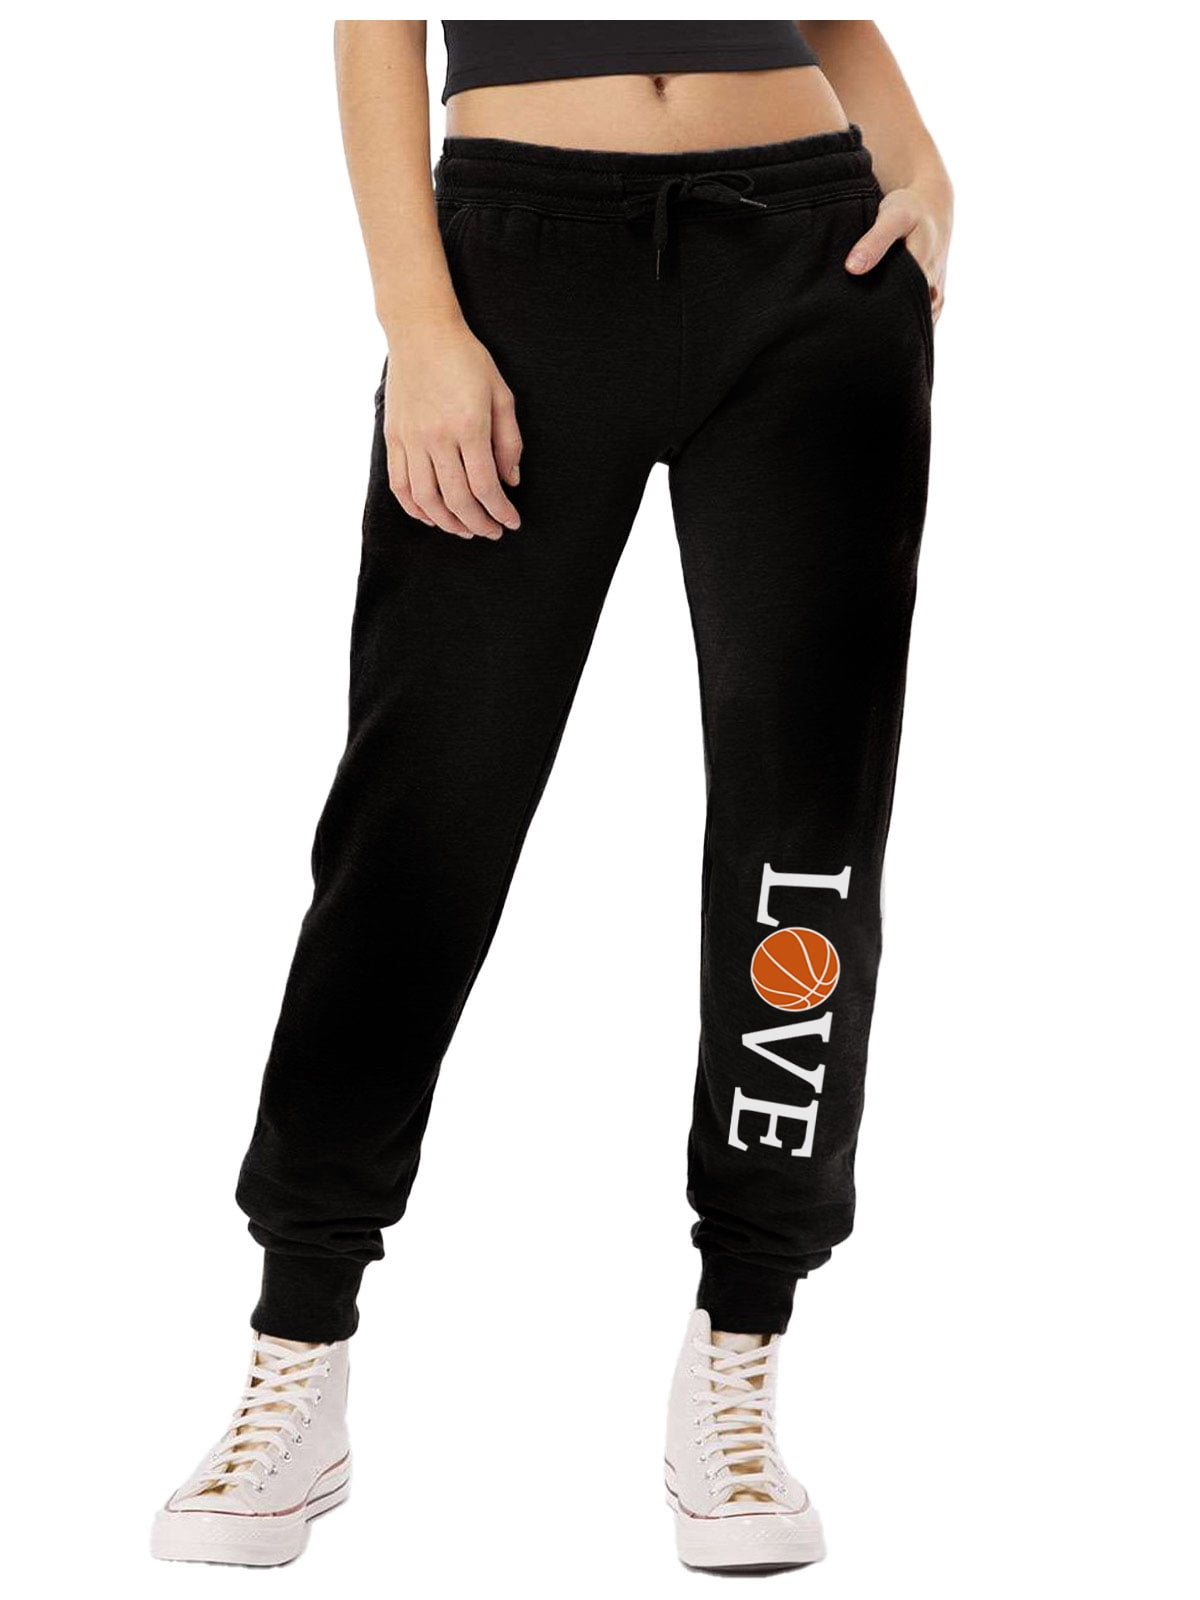 Horse Lover Joggers for Women Sweatpants for Teen Girls Horses Fleece  Joggers XX-Large Gray 